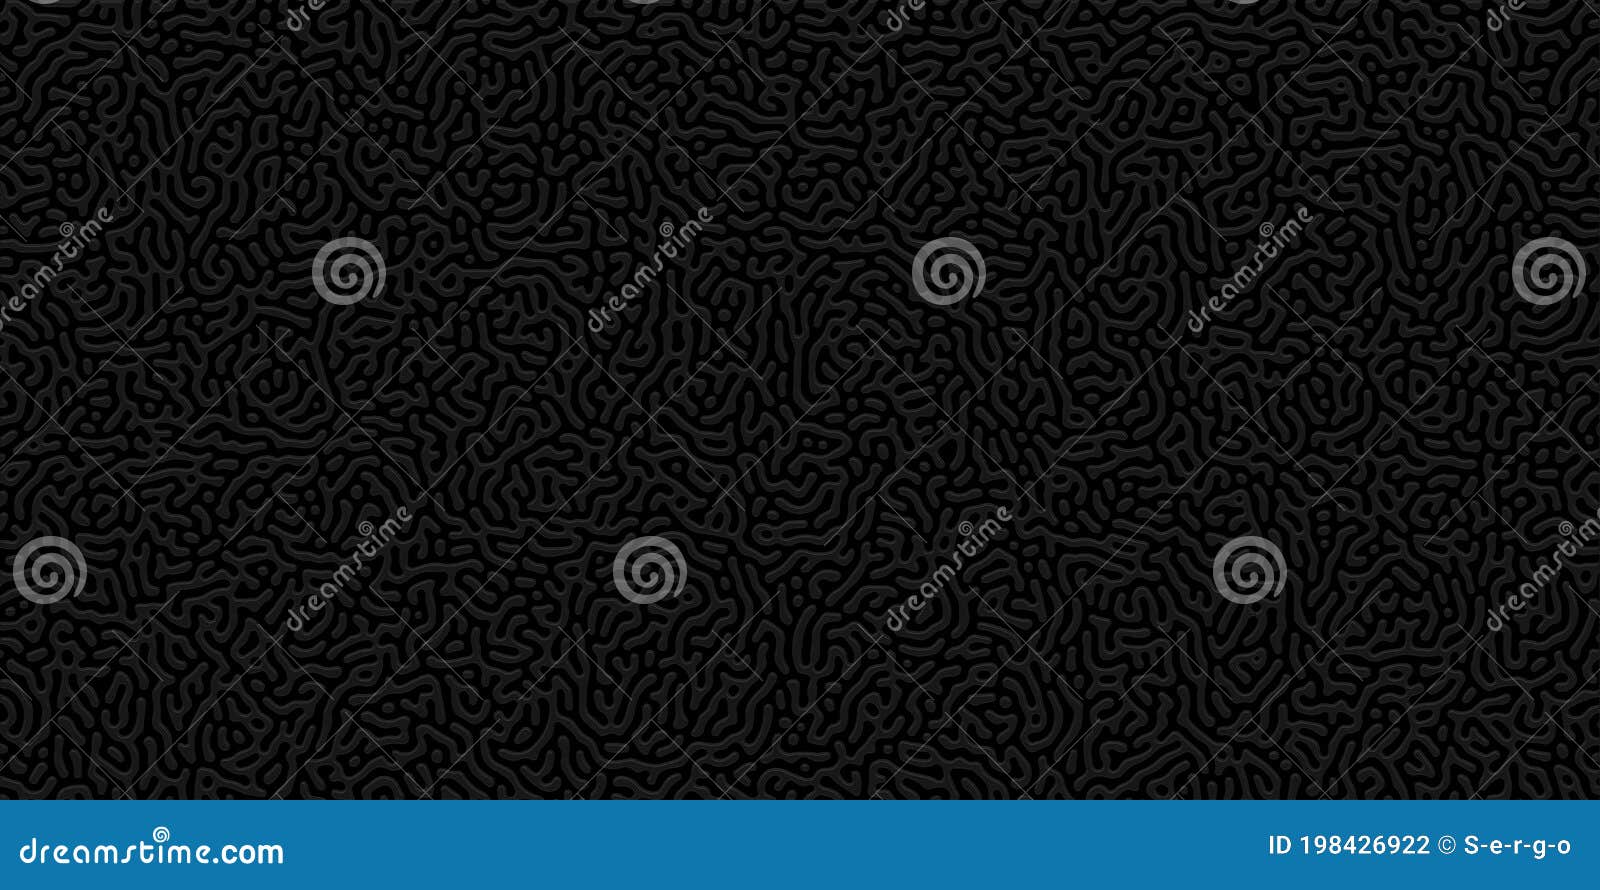 abstract turing background. camouflage black pattern.